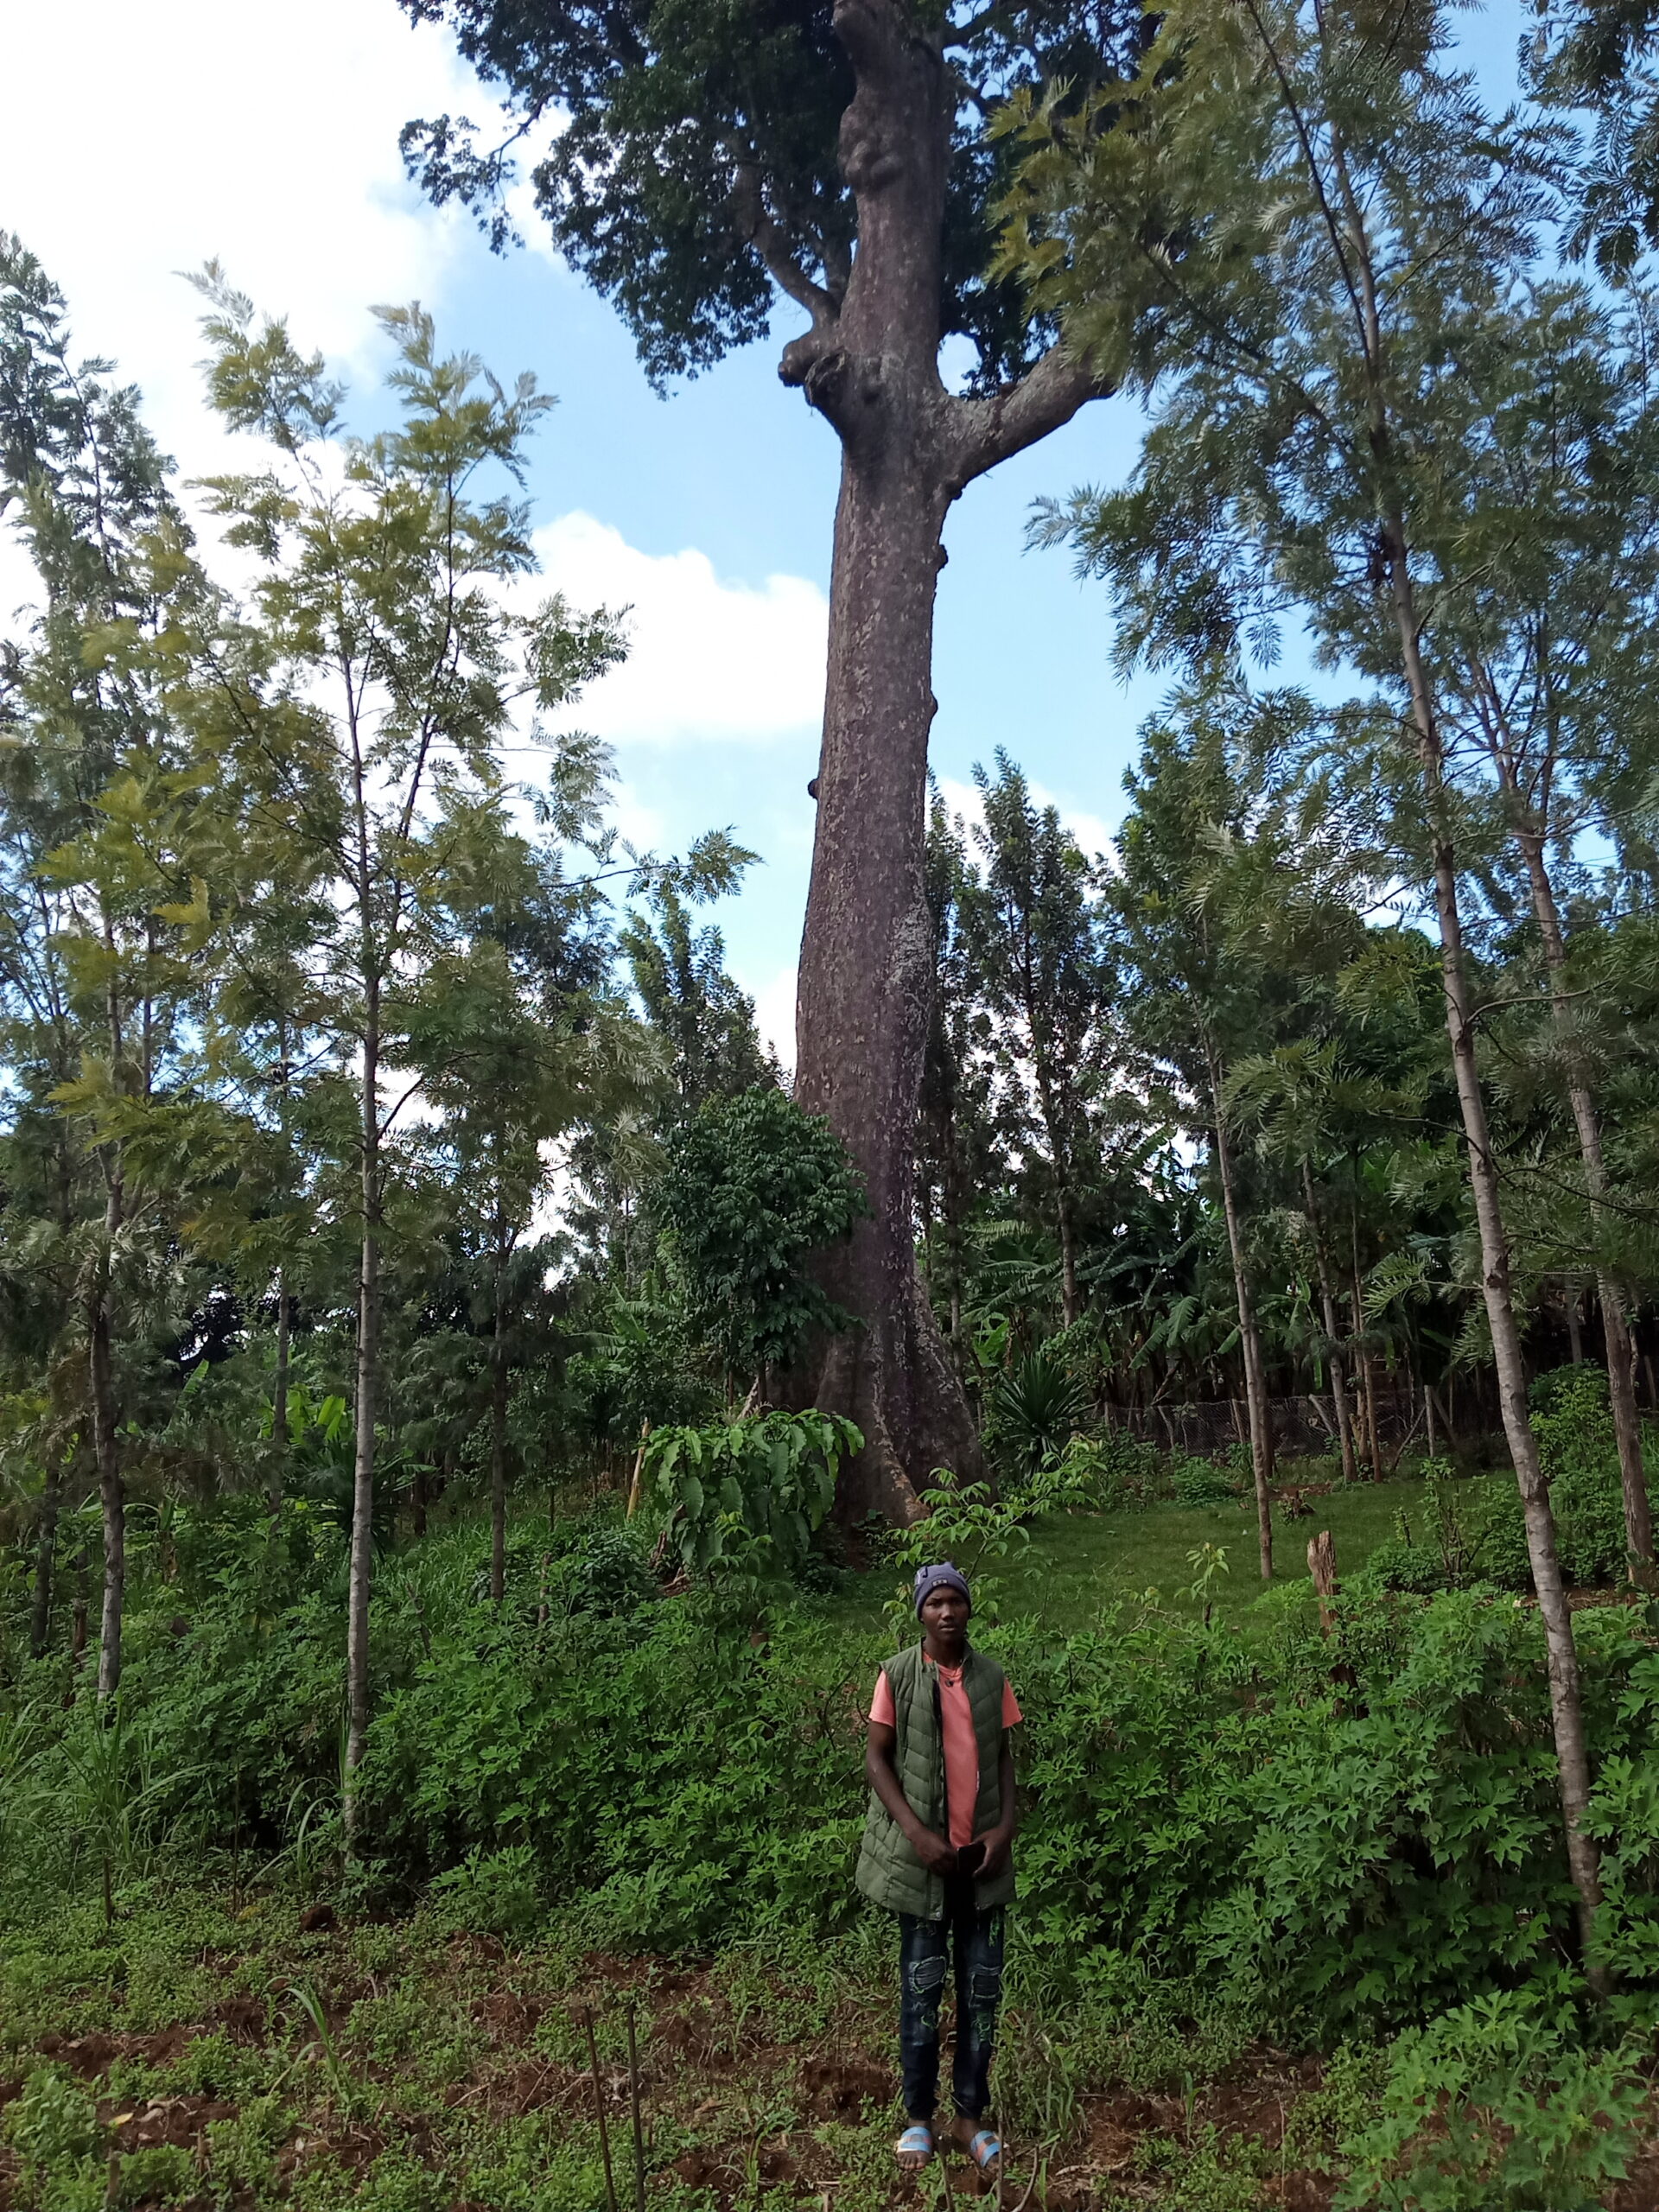 Mutunguru: the tallest tree in Kenya and probably the second tallest